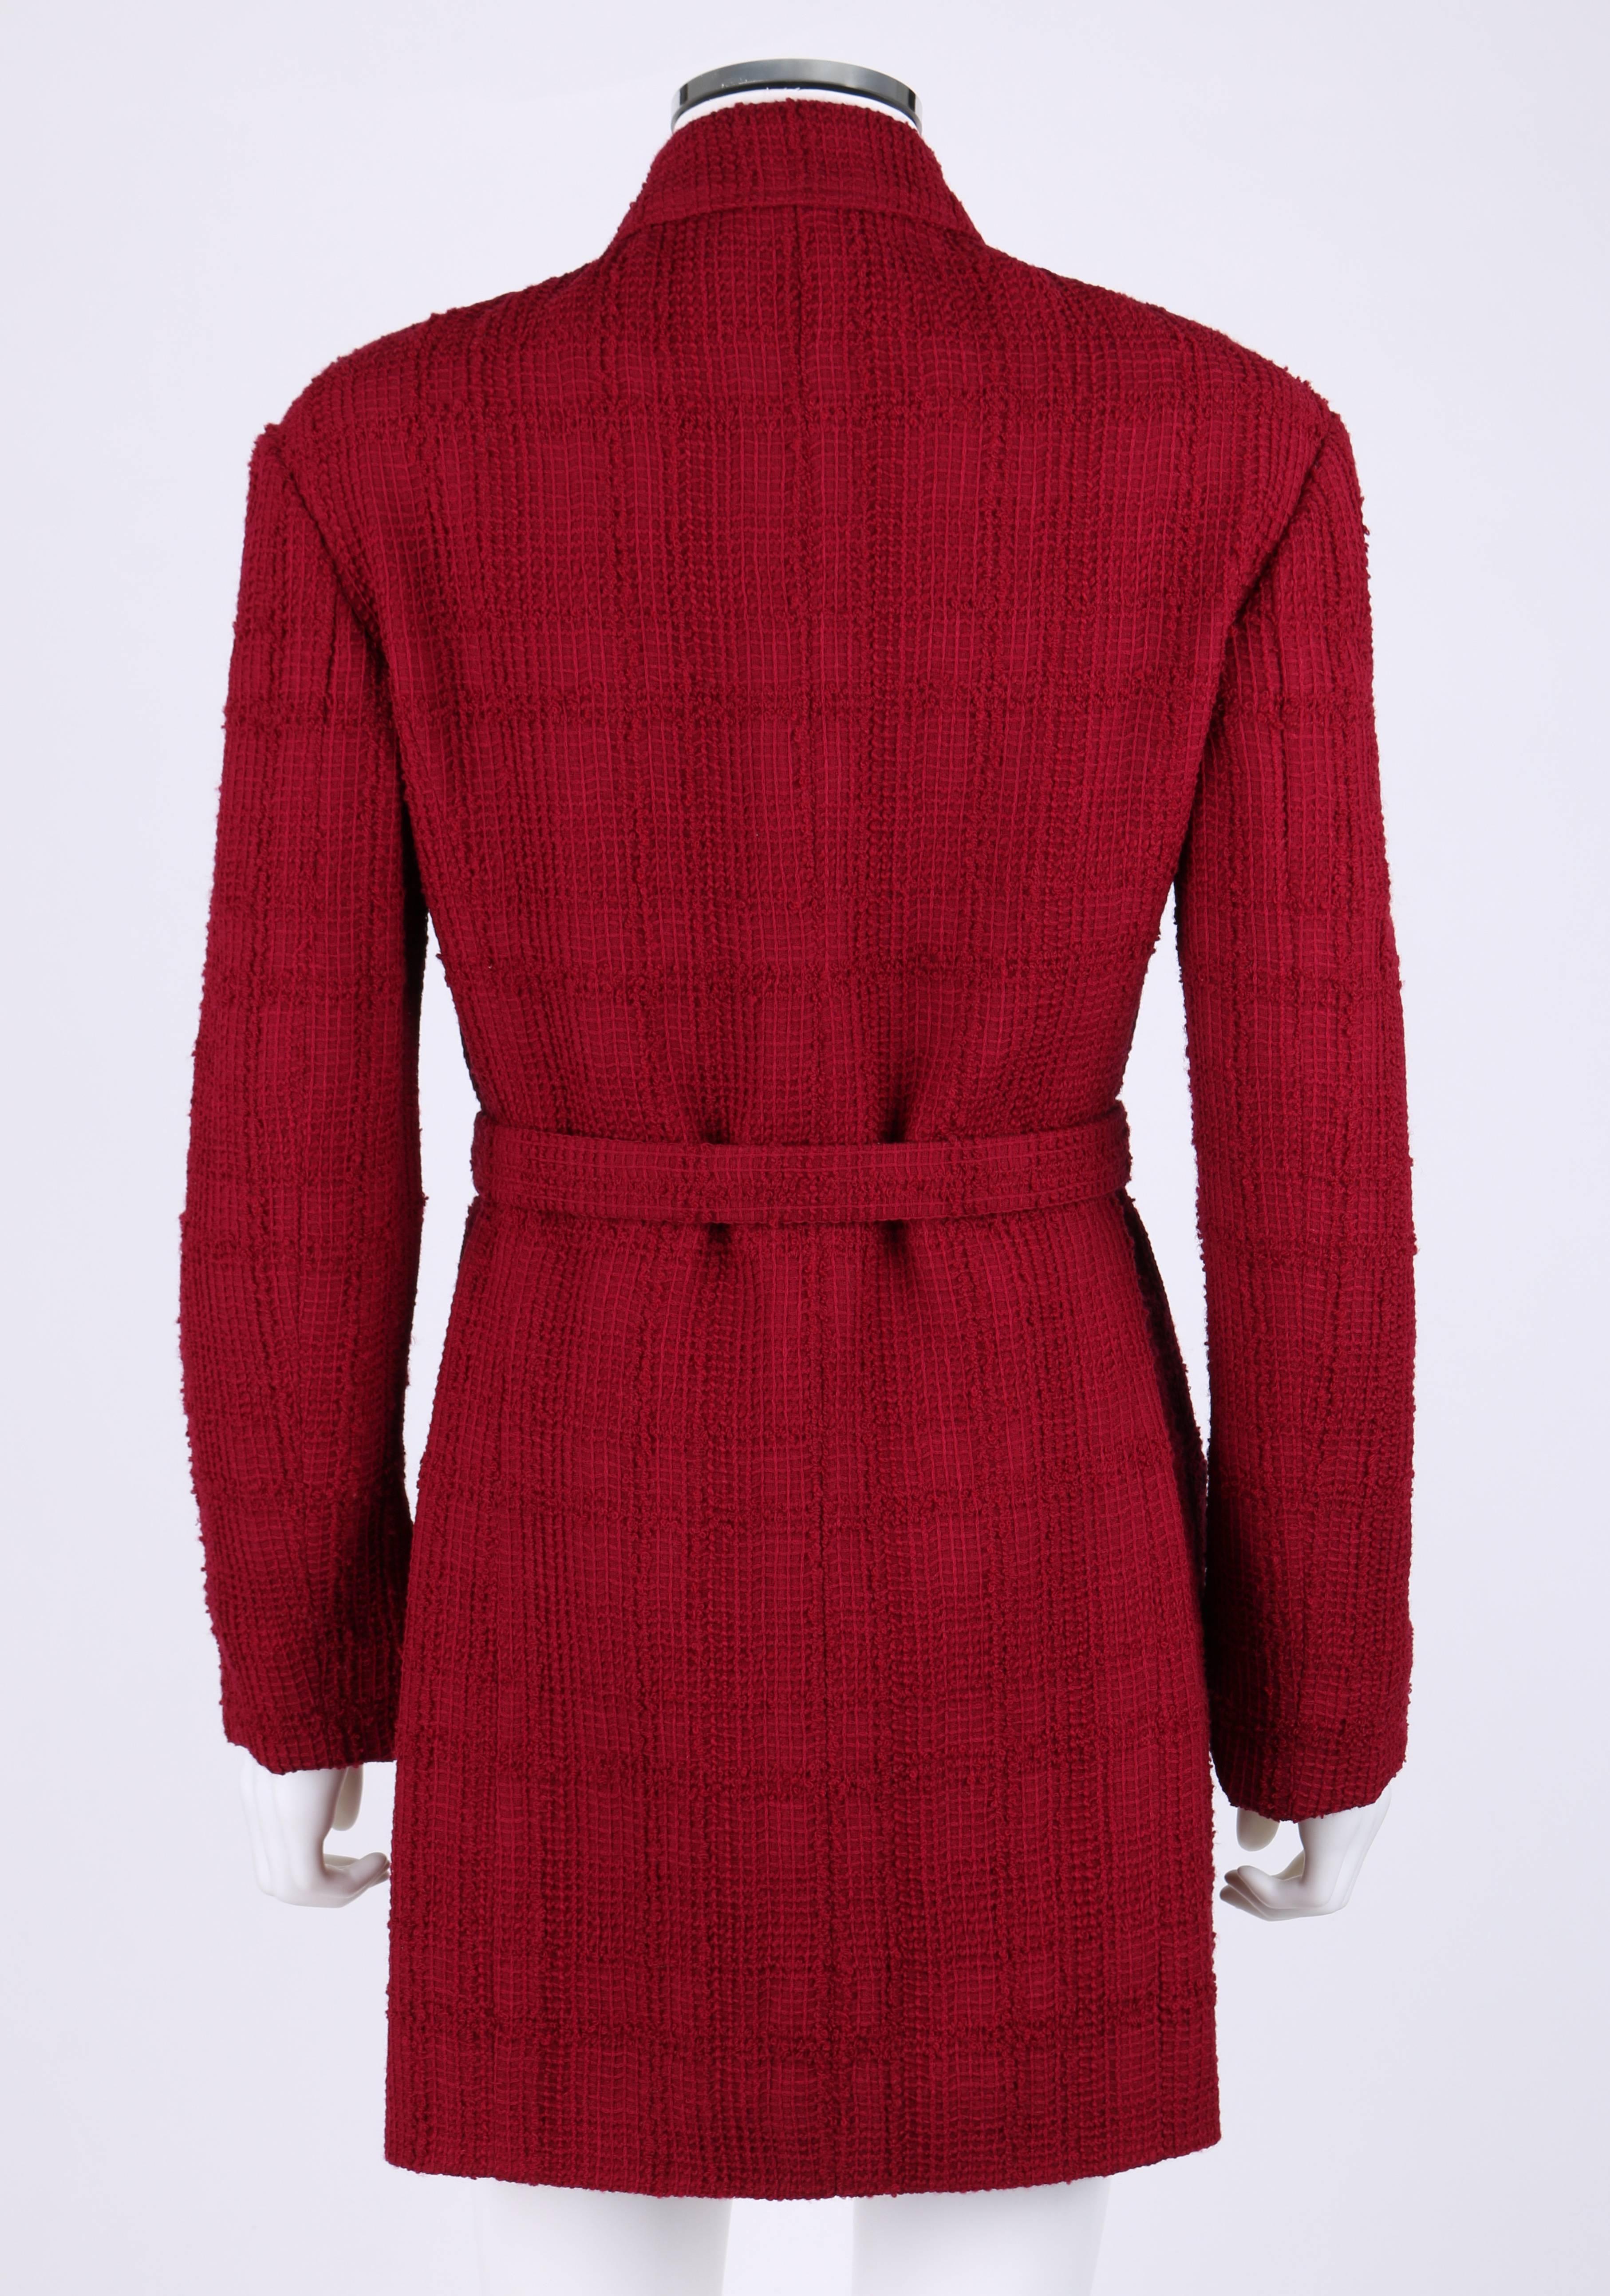 CHANEL Boutique A/W 1998 Garnet Red Plaid Boucle Wool Two Button Jacket ...